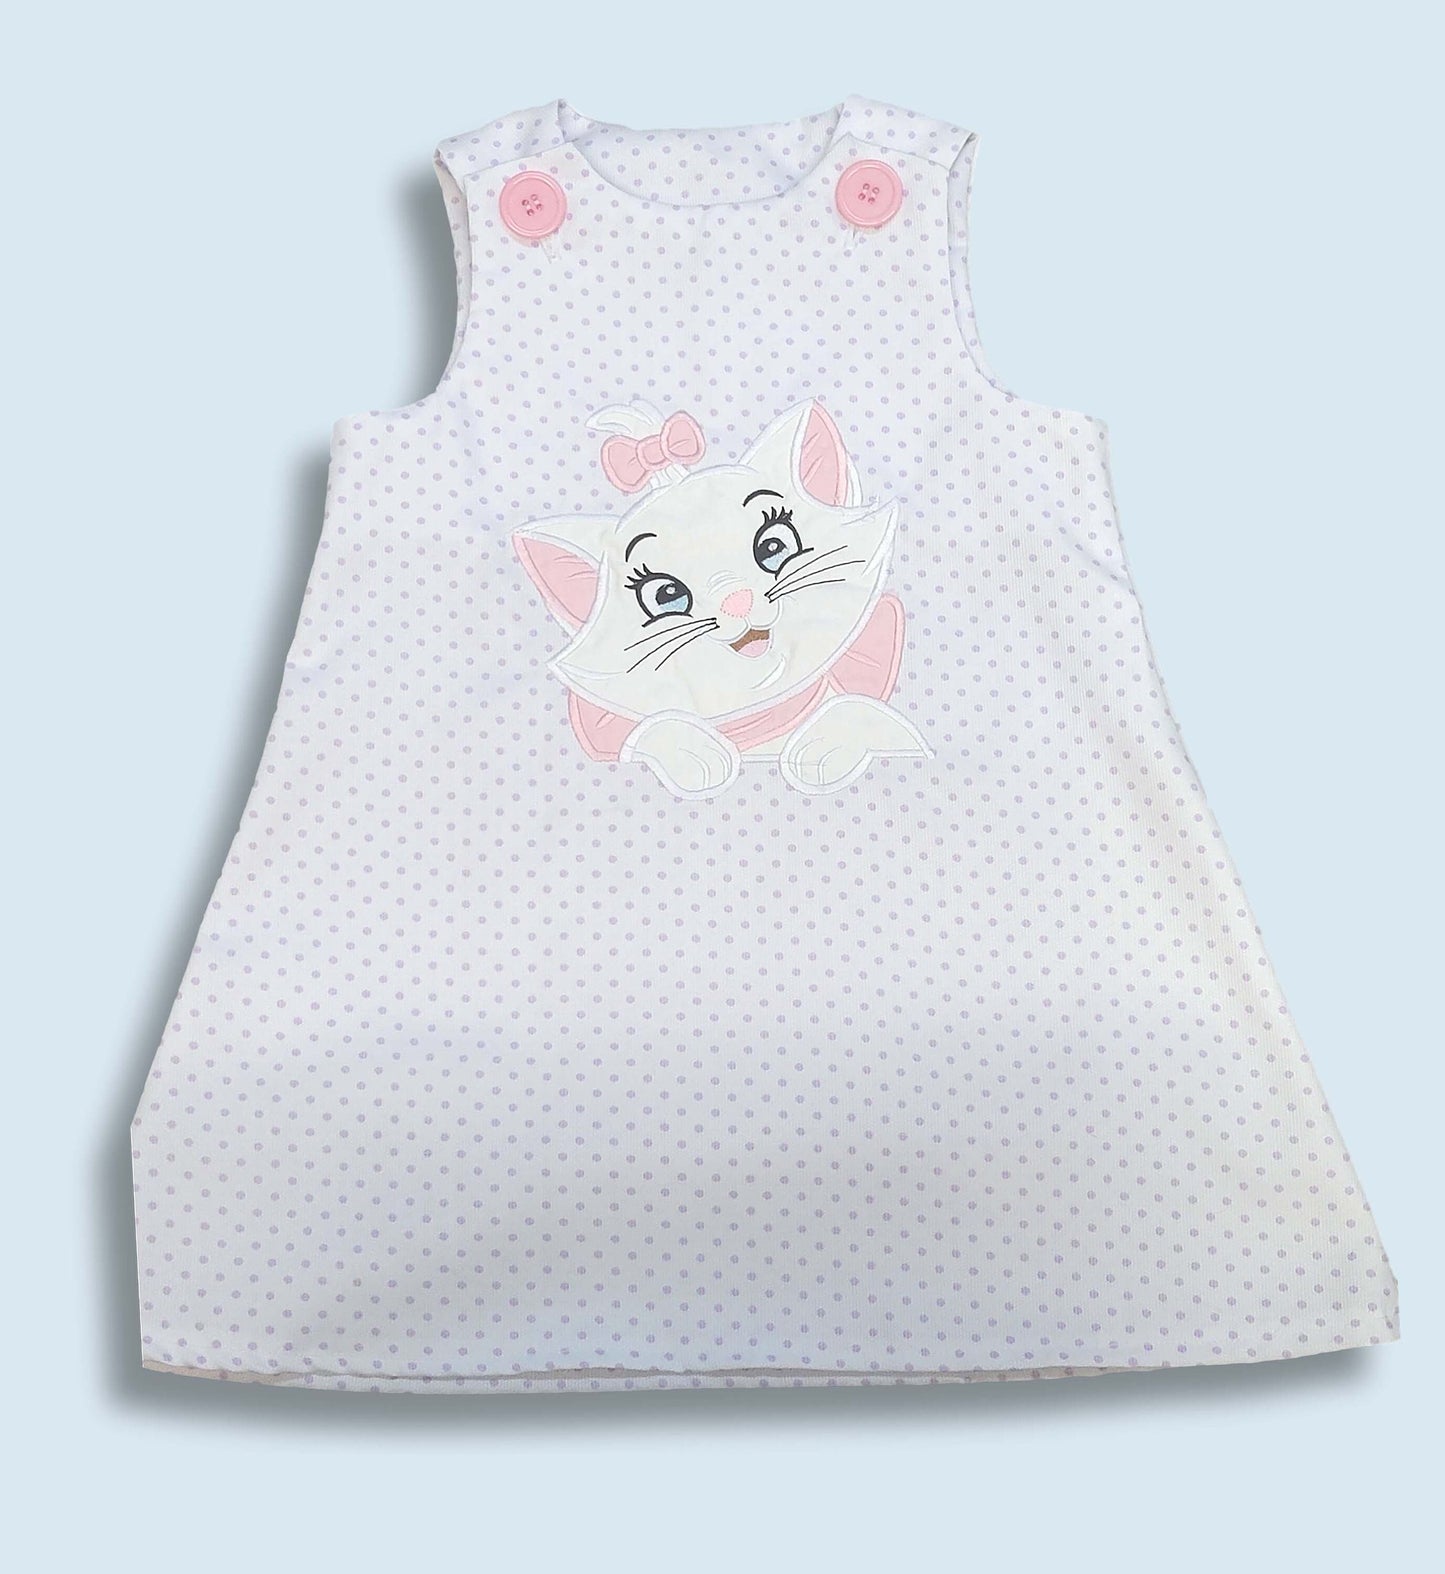 Marie   Dress, The Aristocats  Birthday dress, Personalized Marie Girls Birthday outfit